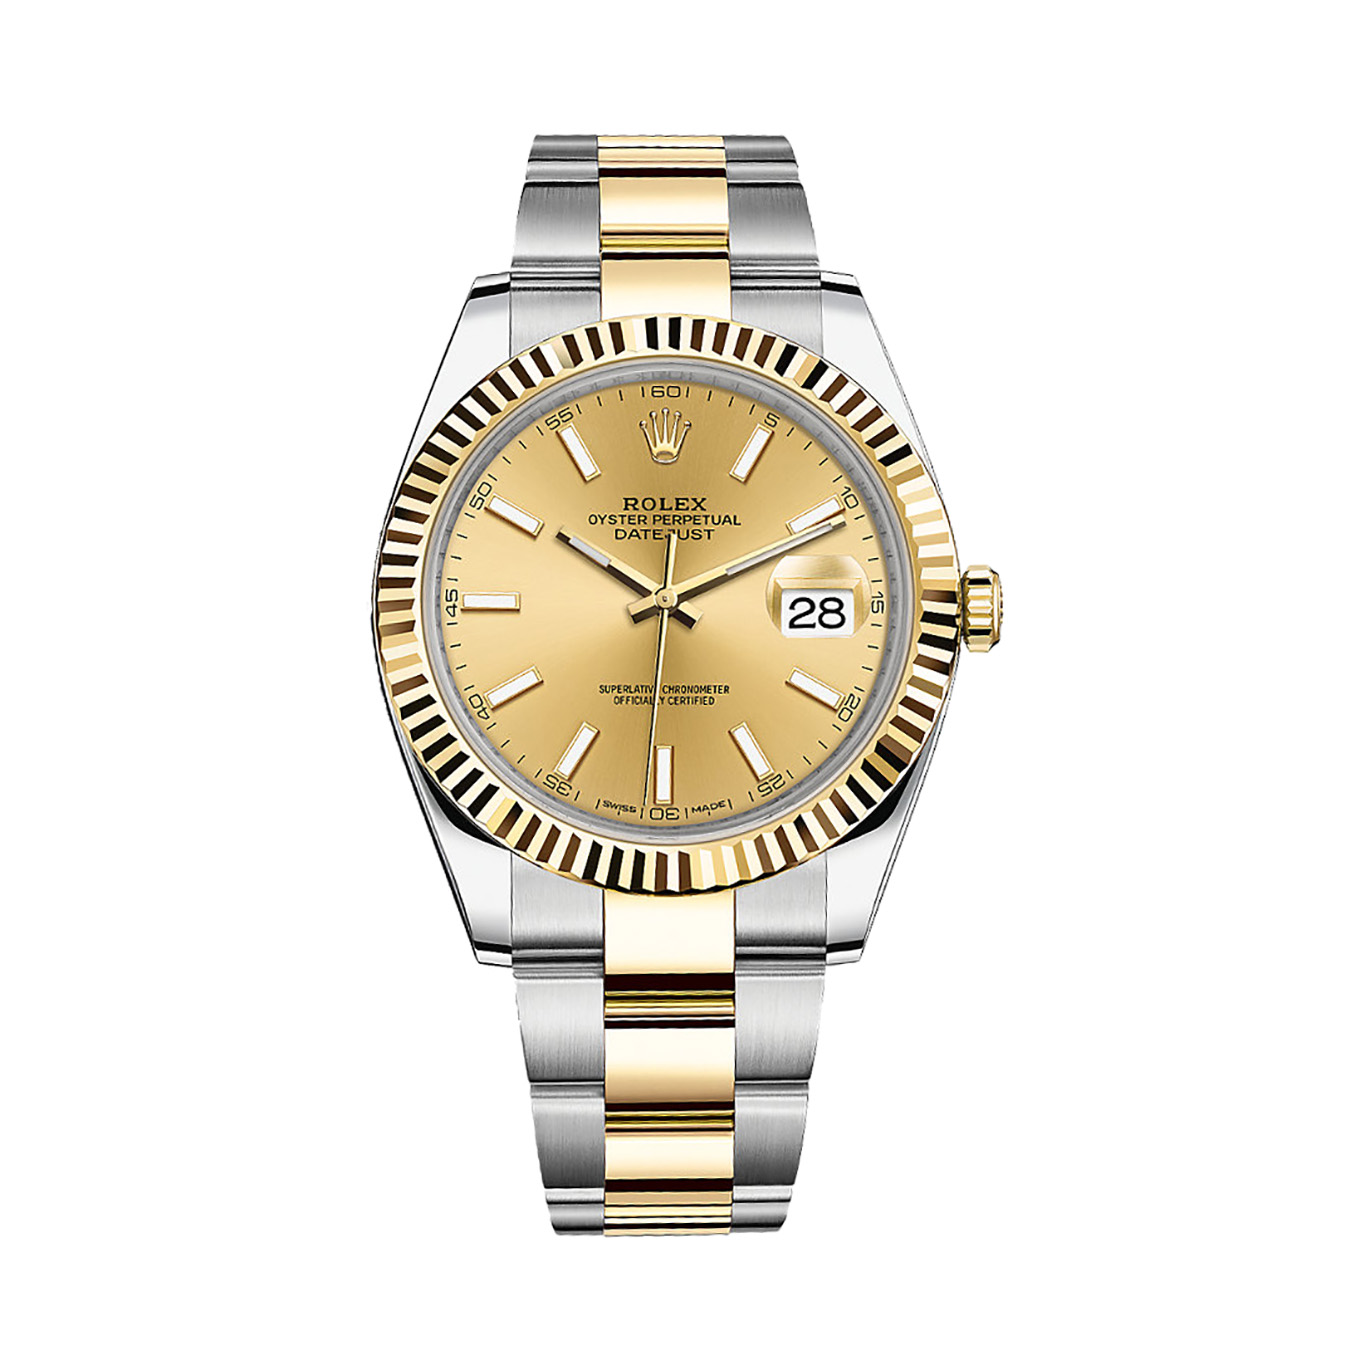 Datejust 41 126333 Gold & Stainless Steel Watch (Champagne)